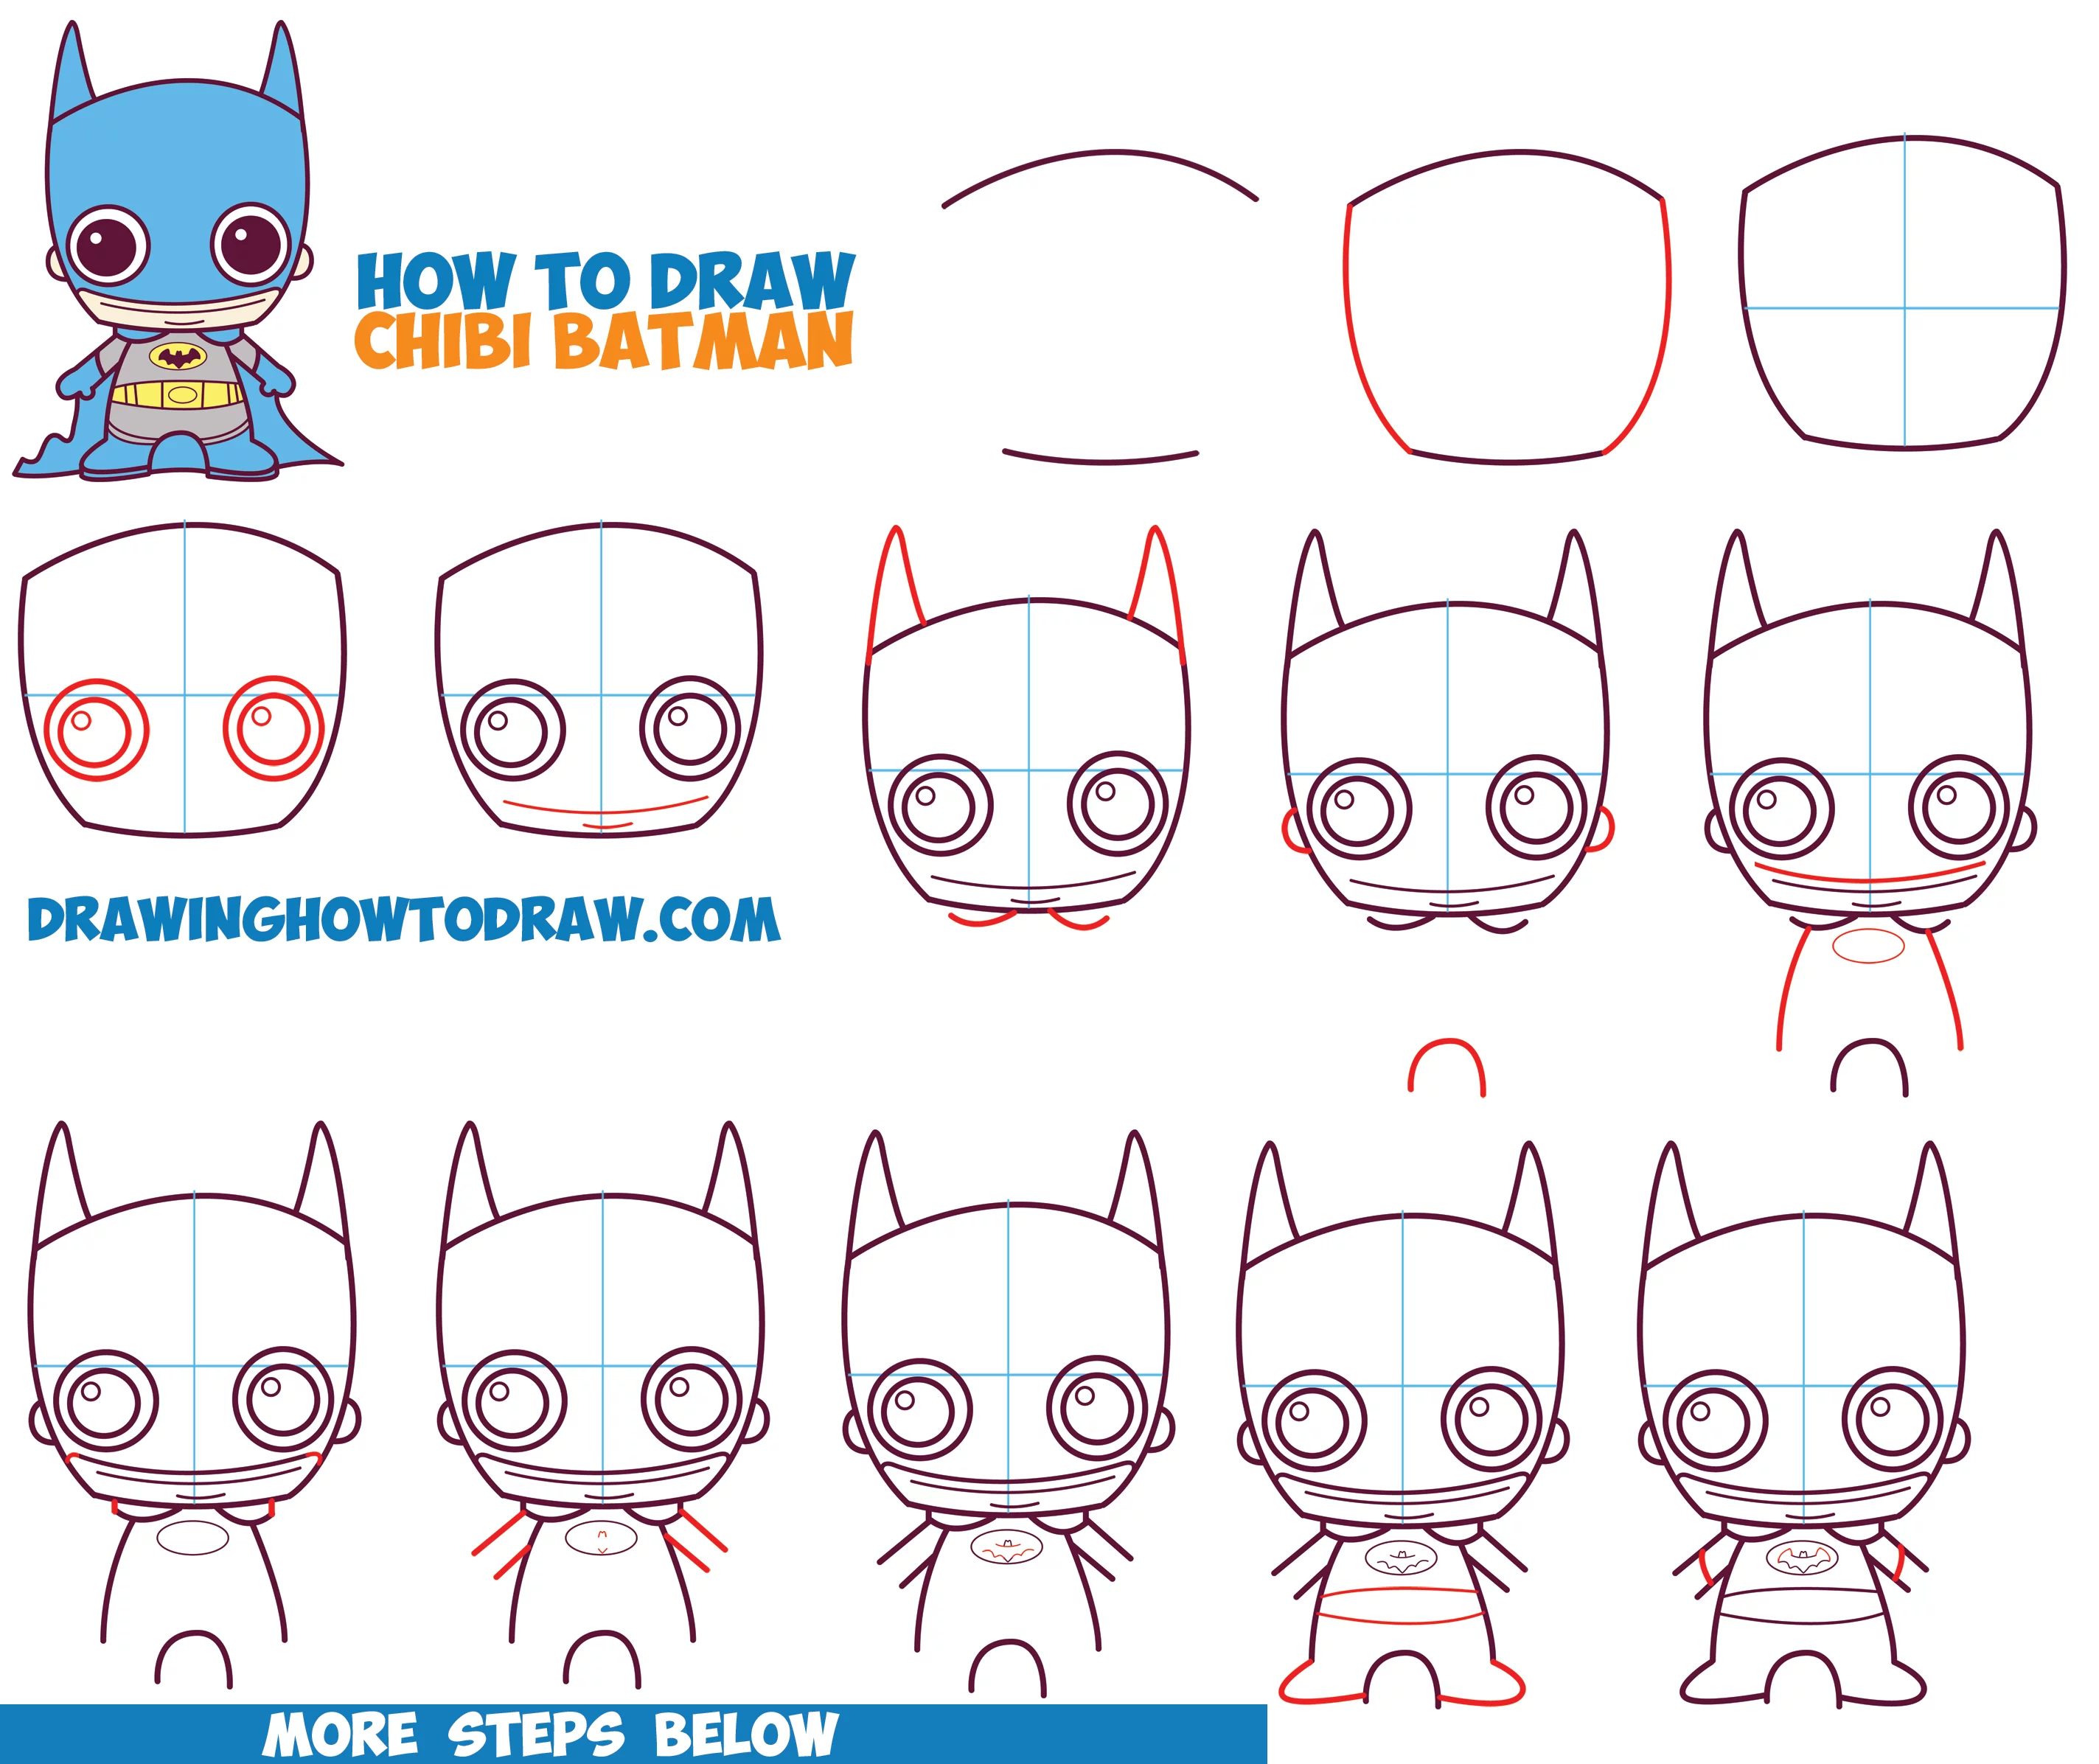  How to Draw Cute Chibi Batman from DC Comics in Easy Step by Step Drawing Tutorial For Kids